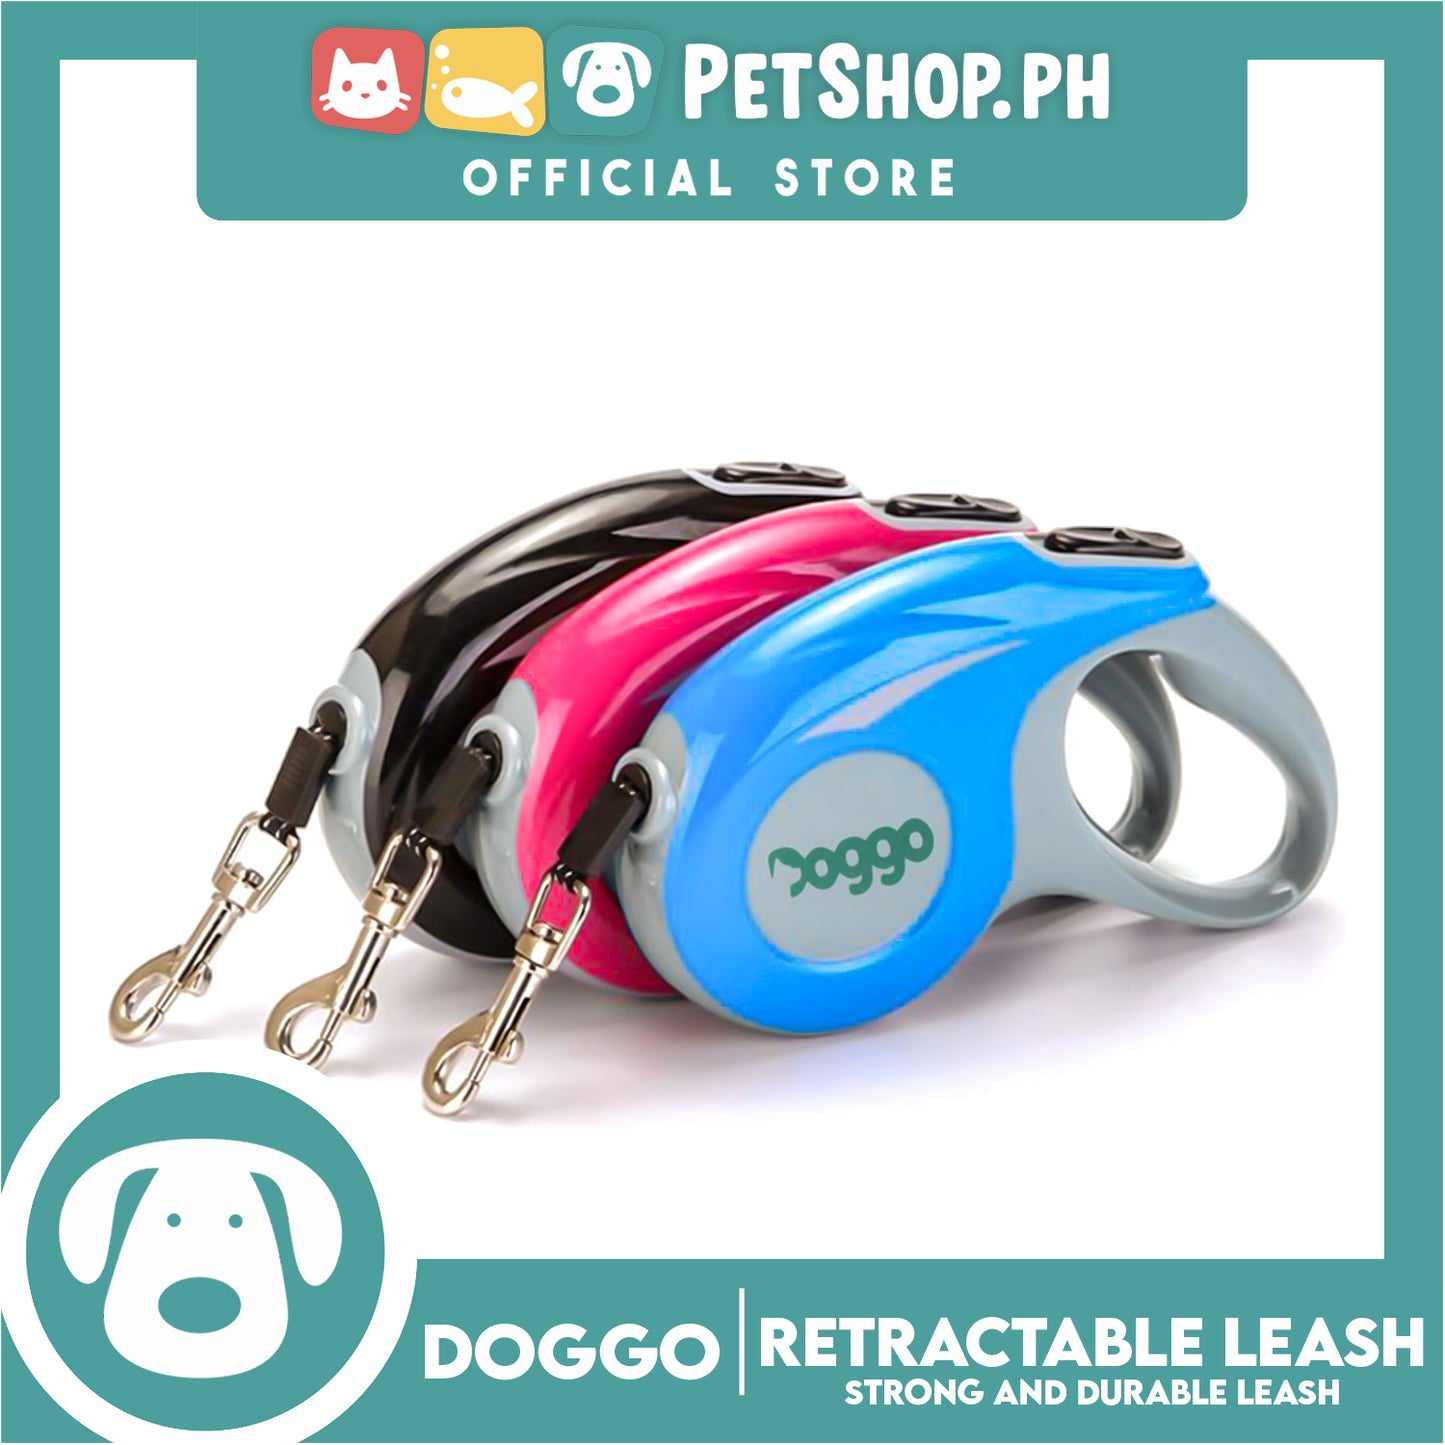 Doggo Retractable Leash 3M (Black) Strong And Durable, In Comfort And Control Running And Convenient